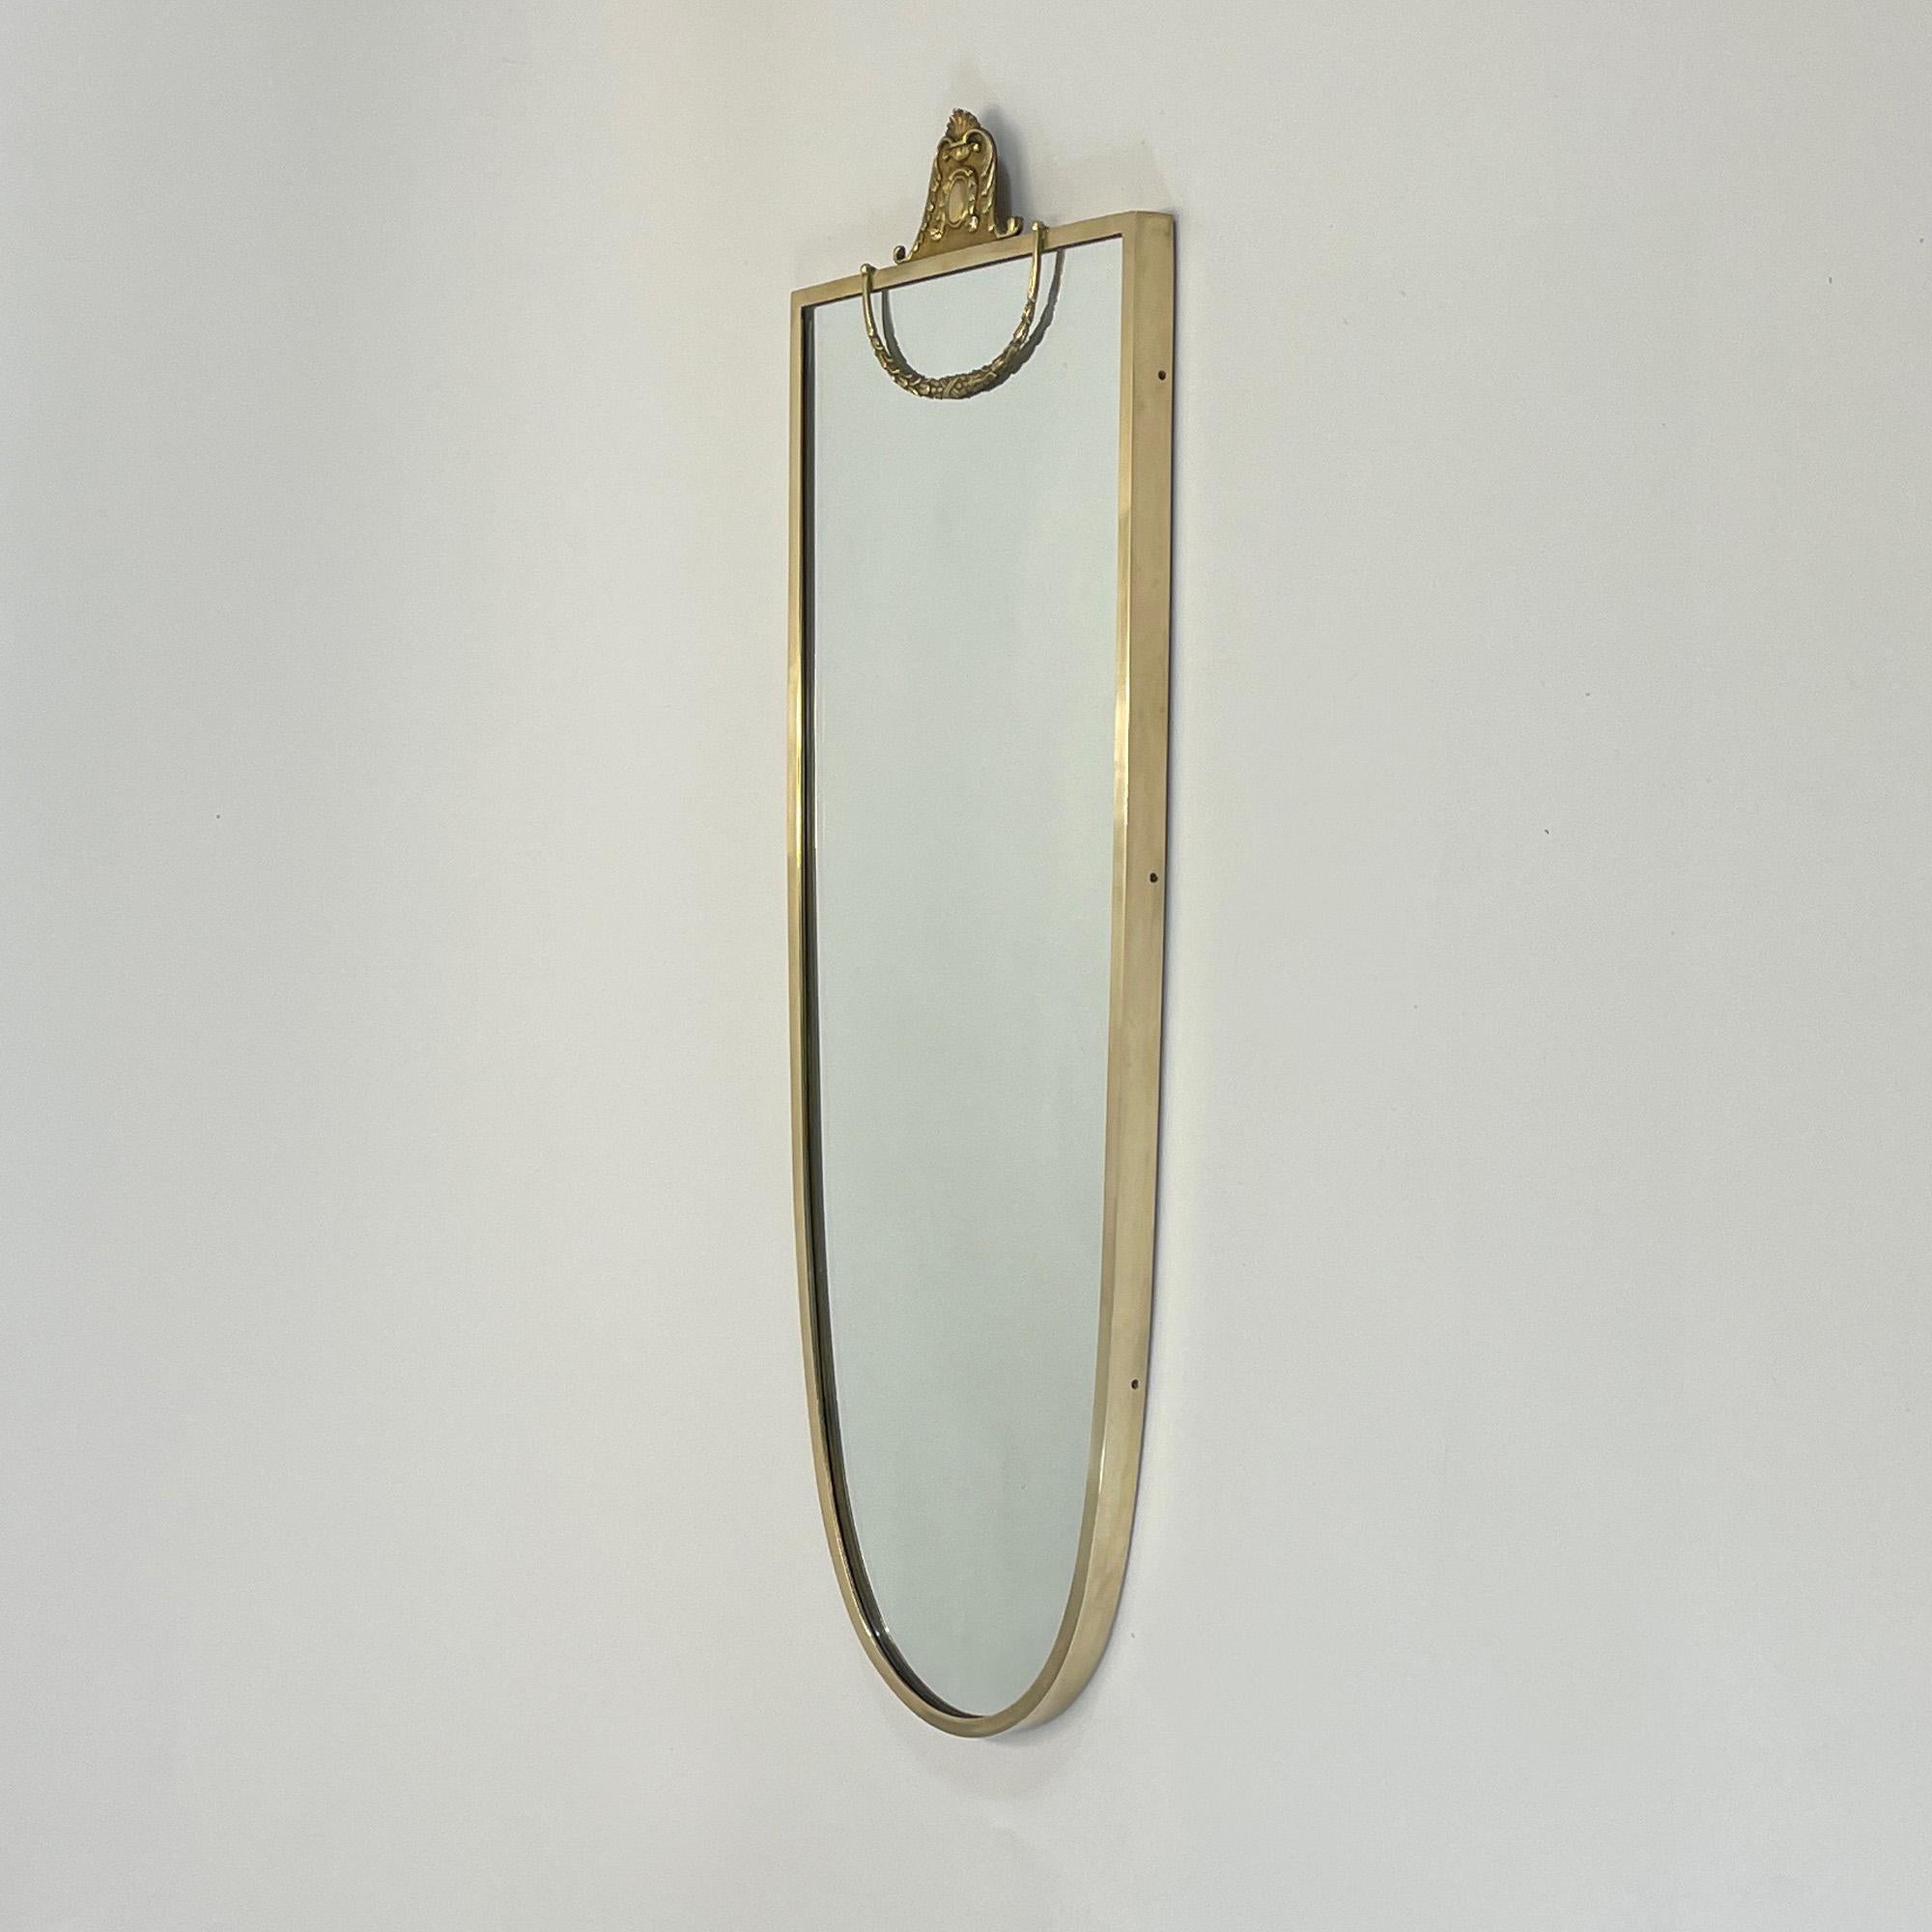 This beautiful Hollywood Regency style wall mirror was designed and manufactured in Italy in the late 1940s to early 1950s. It features a solid brass shield shaped frame and mirror glass.

The overall condition is very good with a nice warm tone to